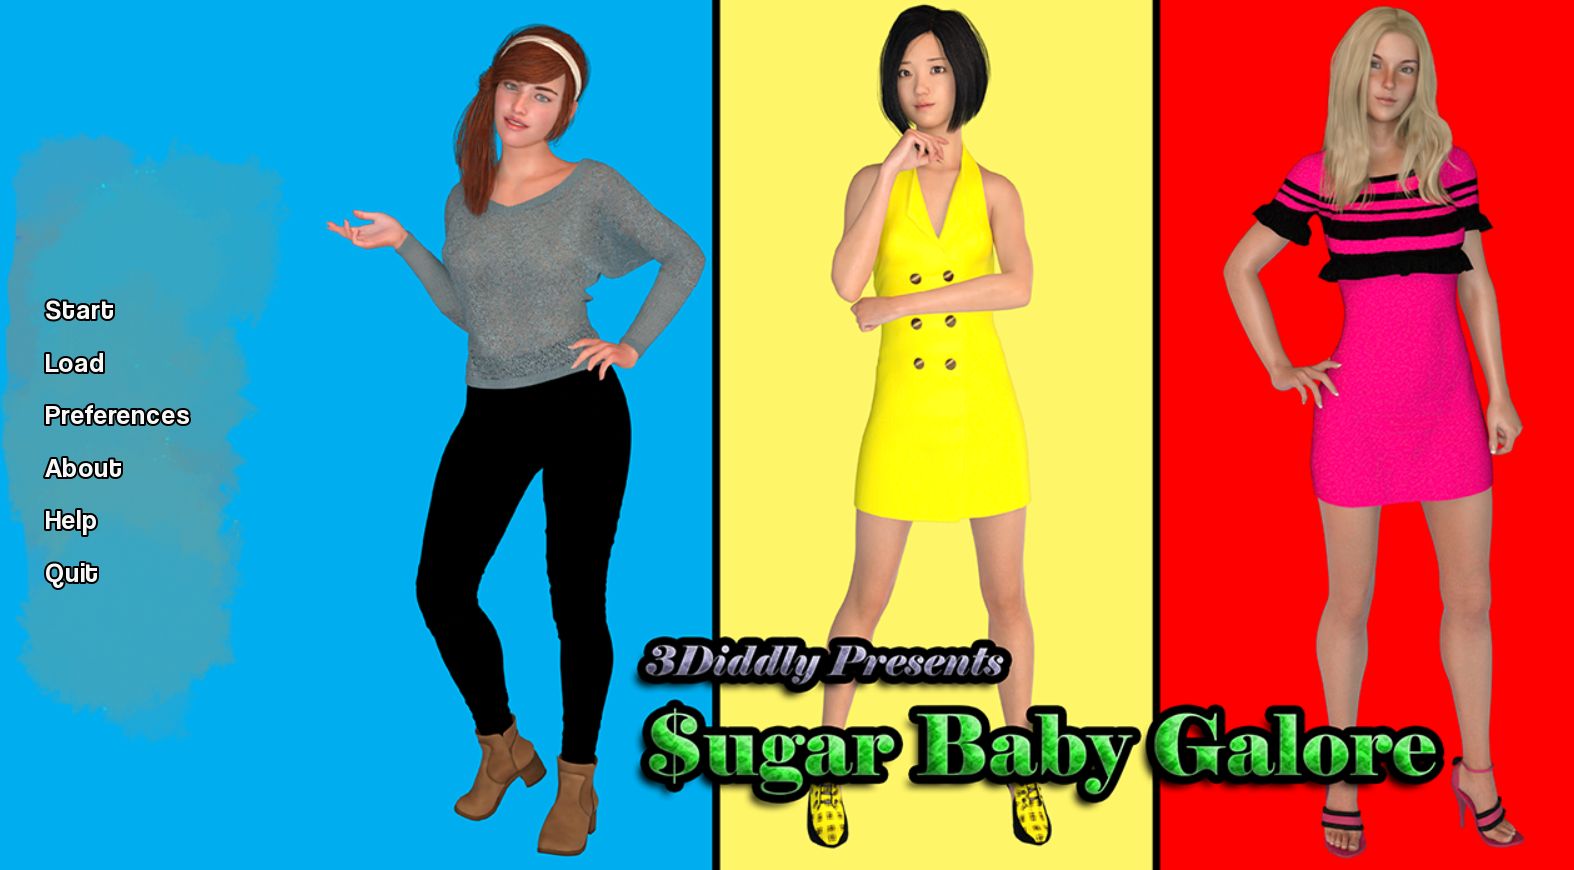 Sugar Baby Galore [3Diddly] Adult xxx Game Download